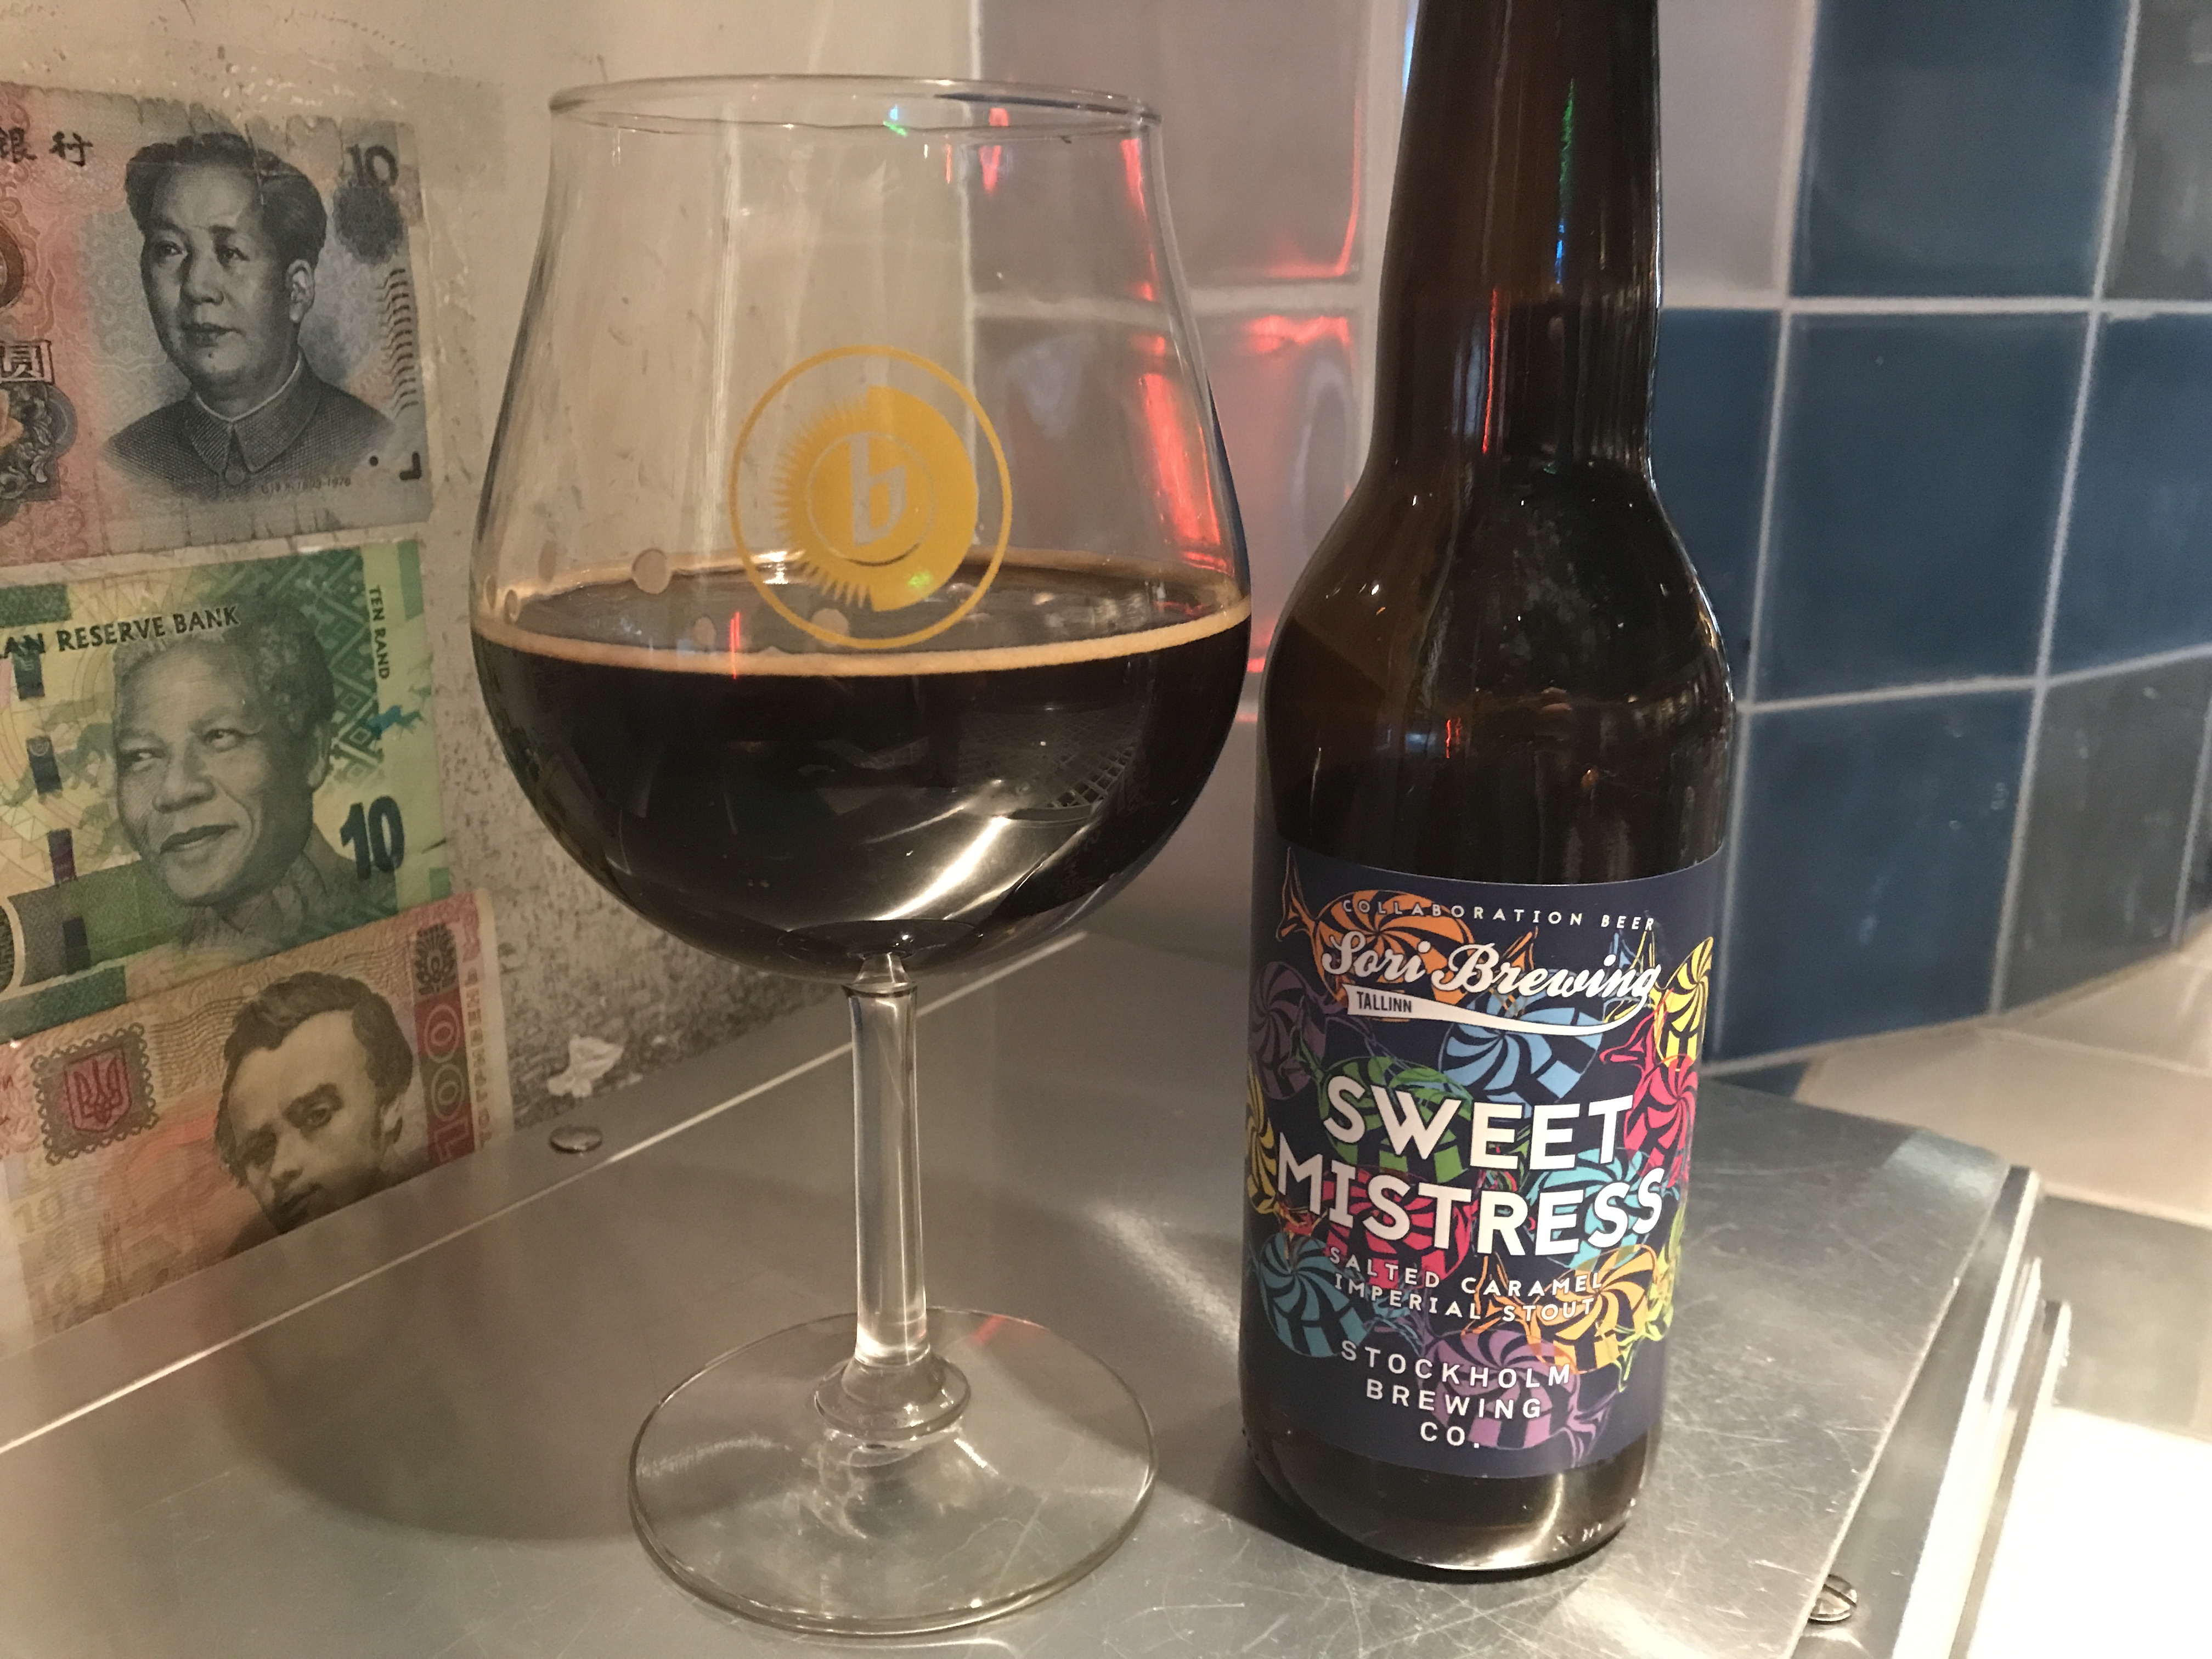 Sweet Mistress by Sori Brewing and Stockholm Brewing Co.